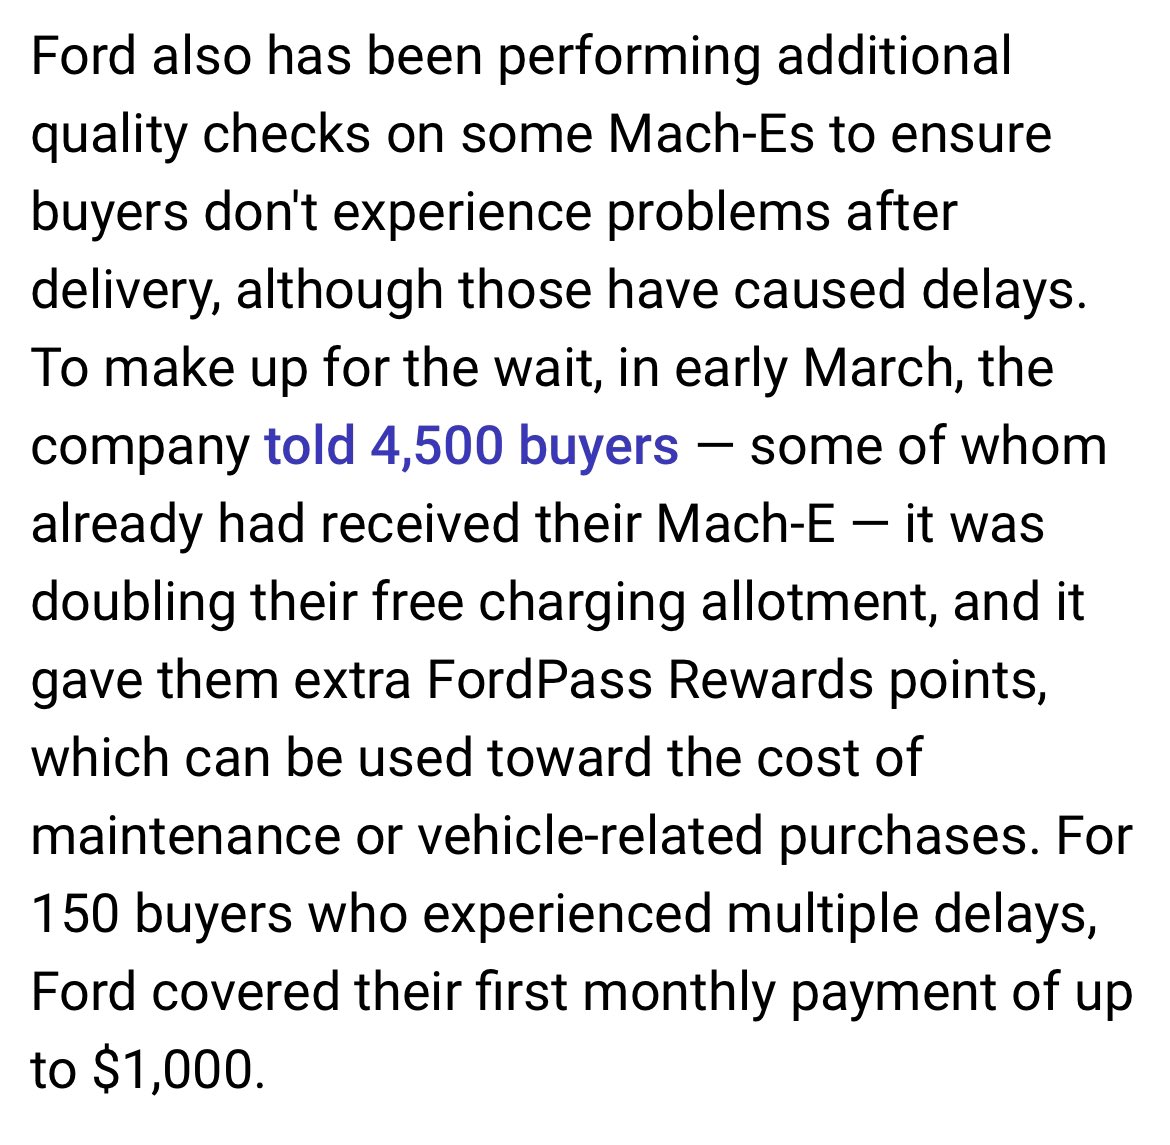 Ford doubled free charging incentives and coveted people’s first months payments for the delays fixing quality issues.